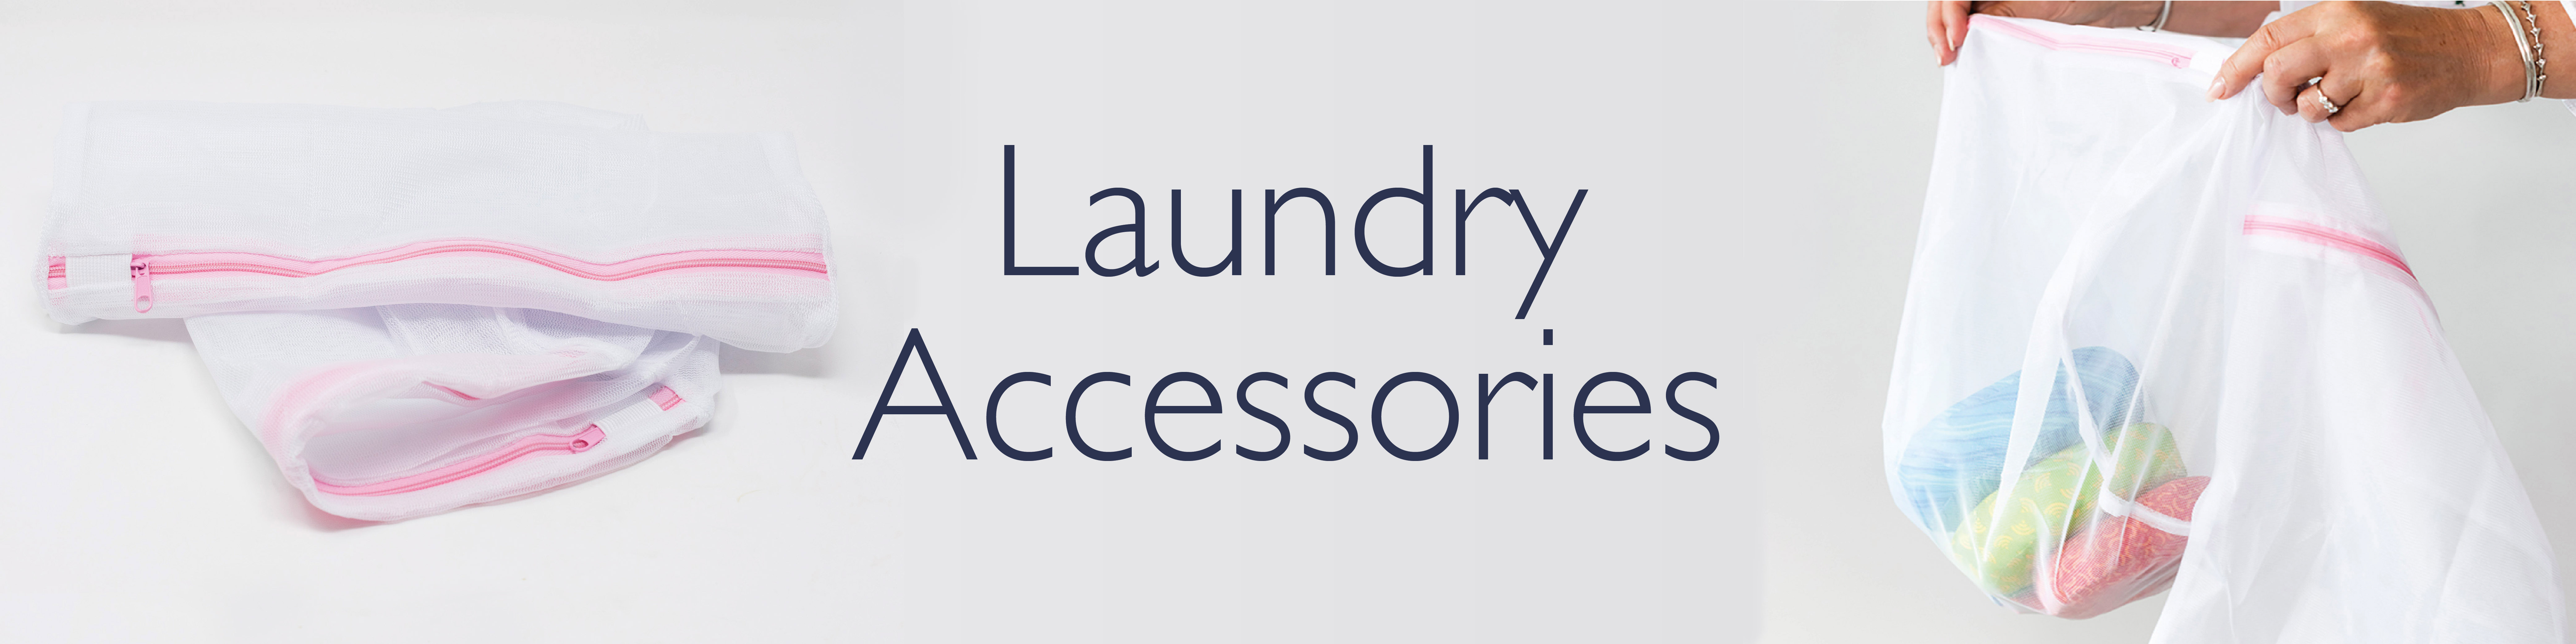 laundry accessories 